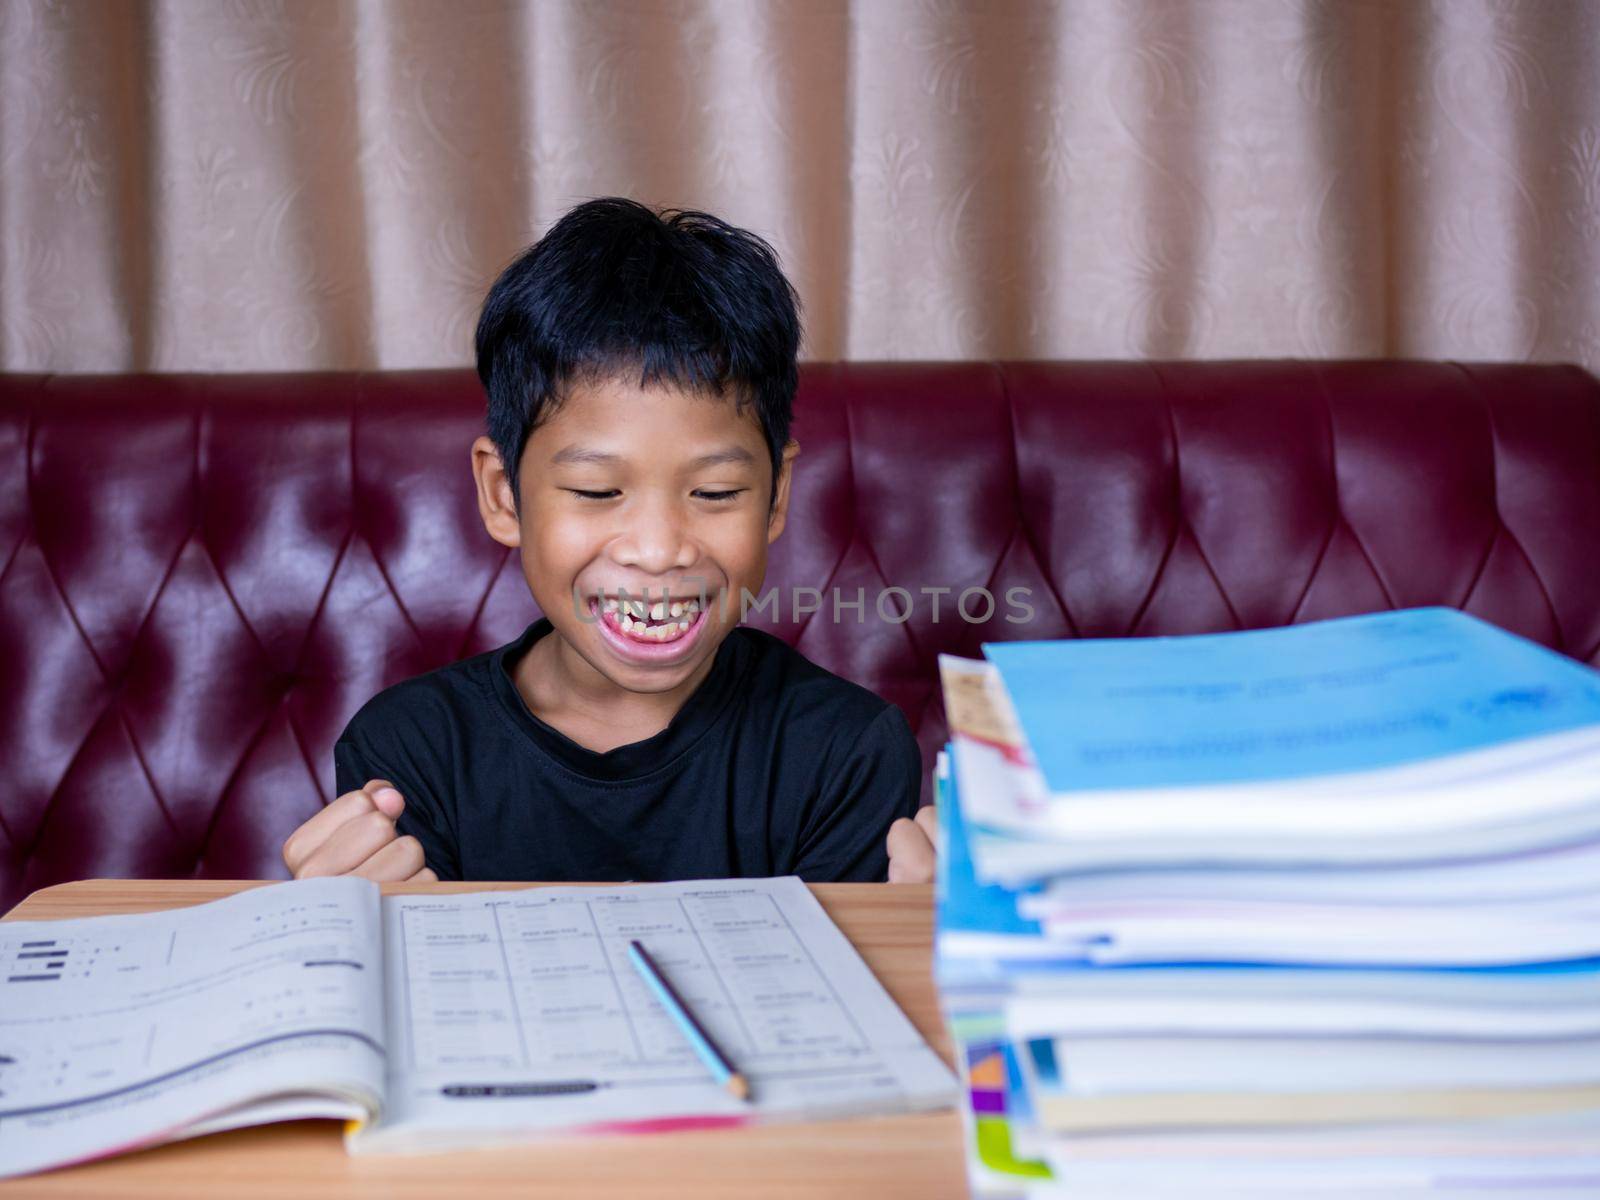 The boy was very happy to finish his homework. He sat on a wooden table and had a stack of books next to it. The background is a red sofa and cream curtains.